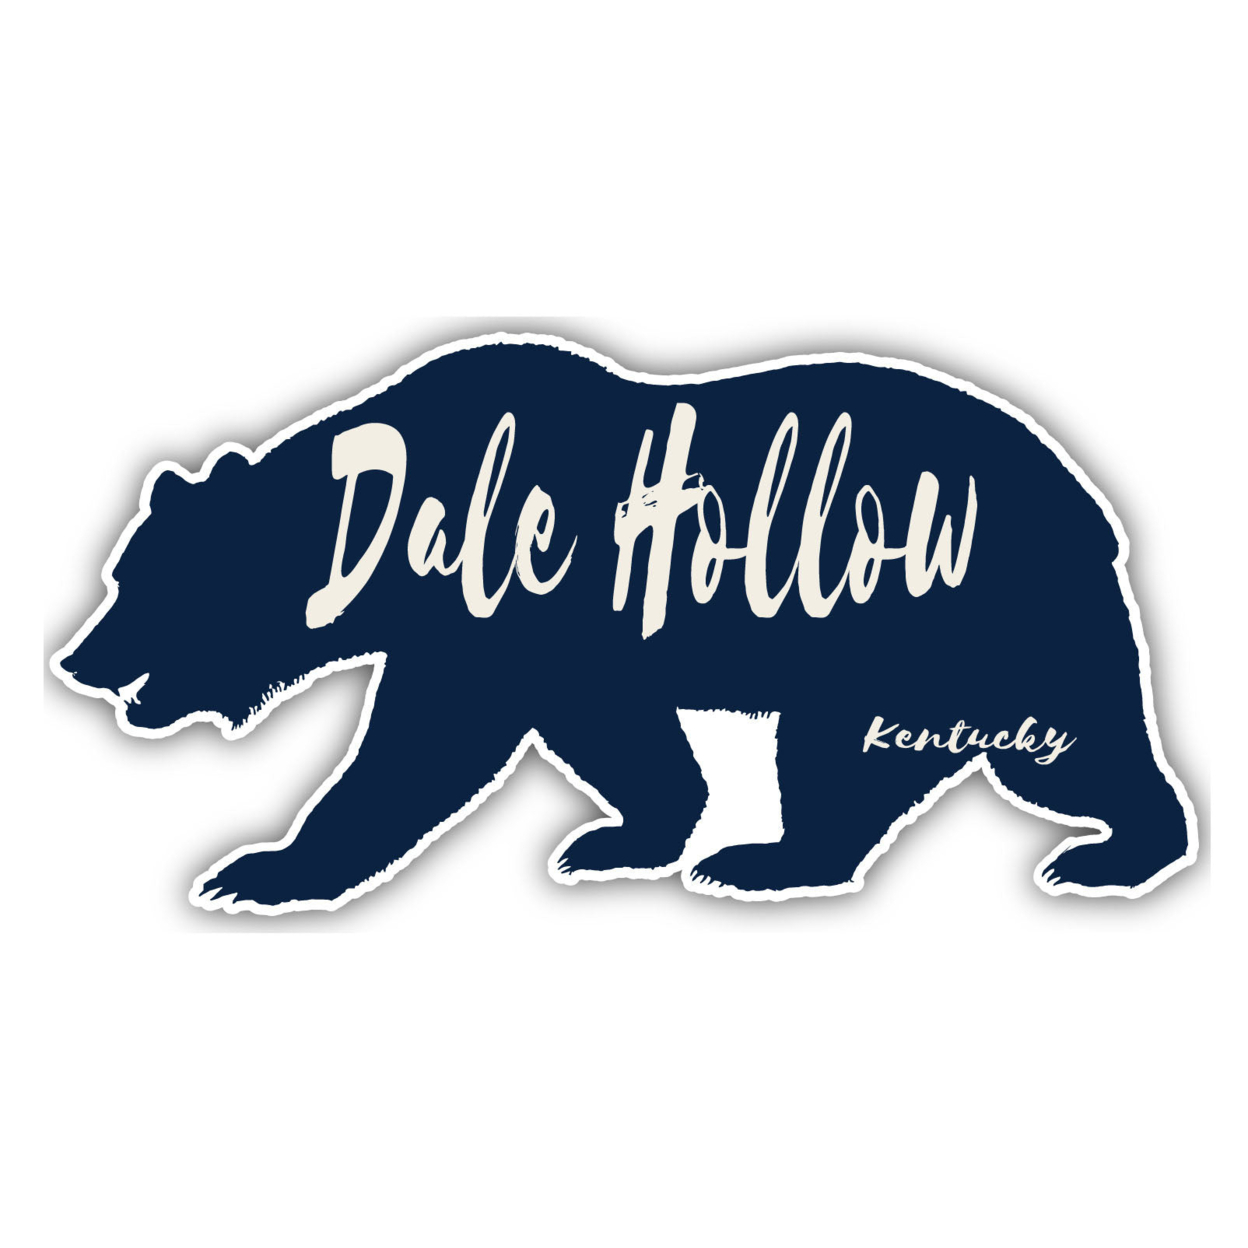 Dale Hollow Kentucky Souvenir Decorative Stickers (Choose Theme And Size) - 4-Pack, 8-Inch, Bear